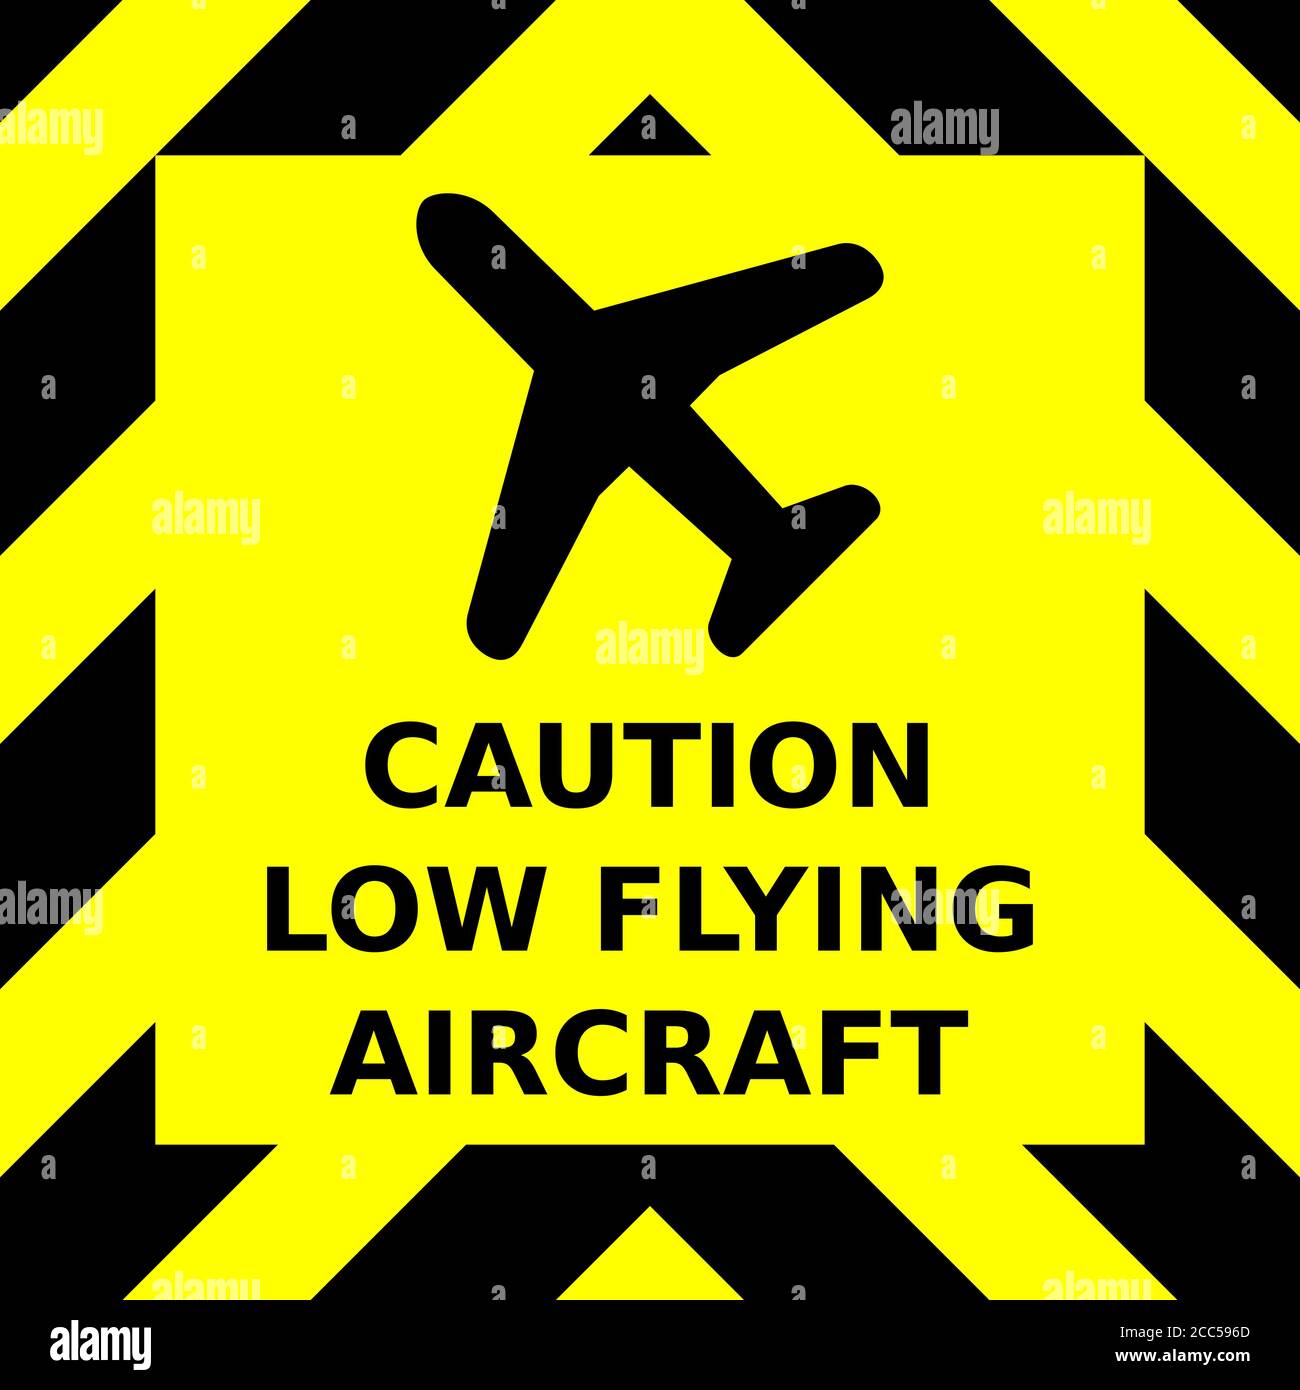 Black and yellow chevron vector graphic sign advising caution because of low flying aircraft Stock Vector